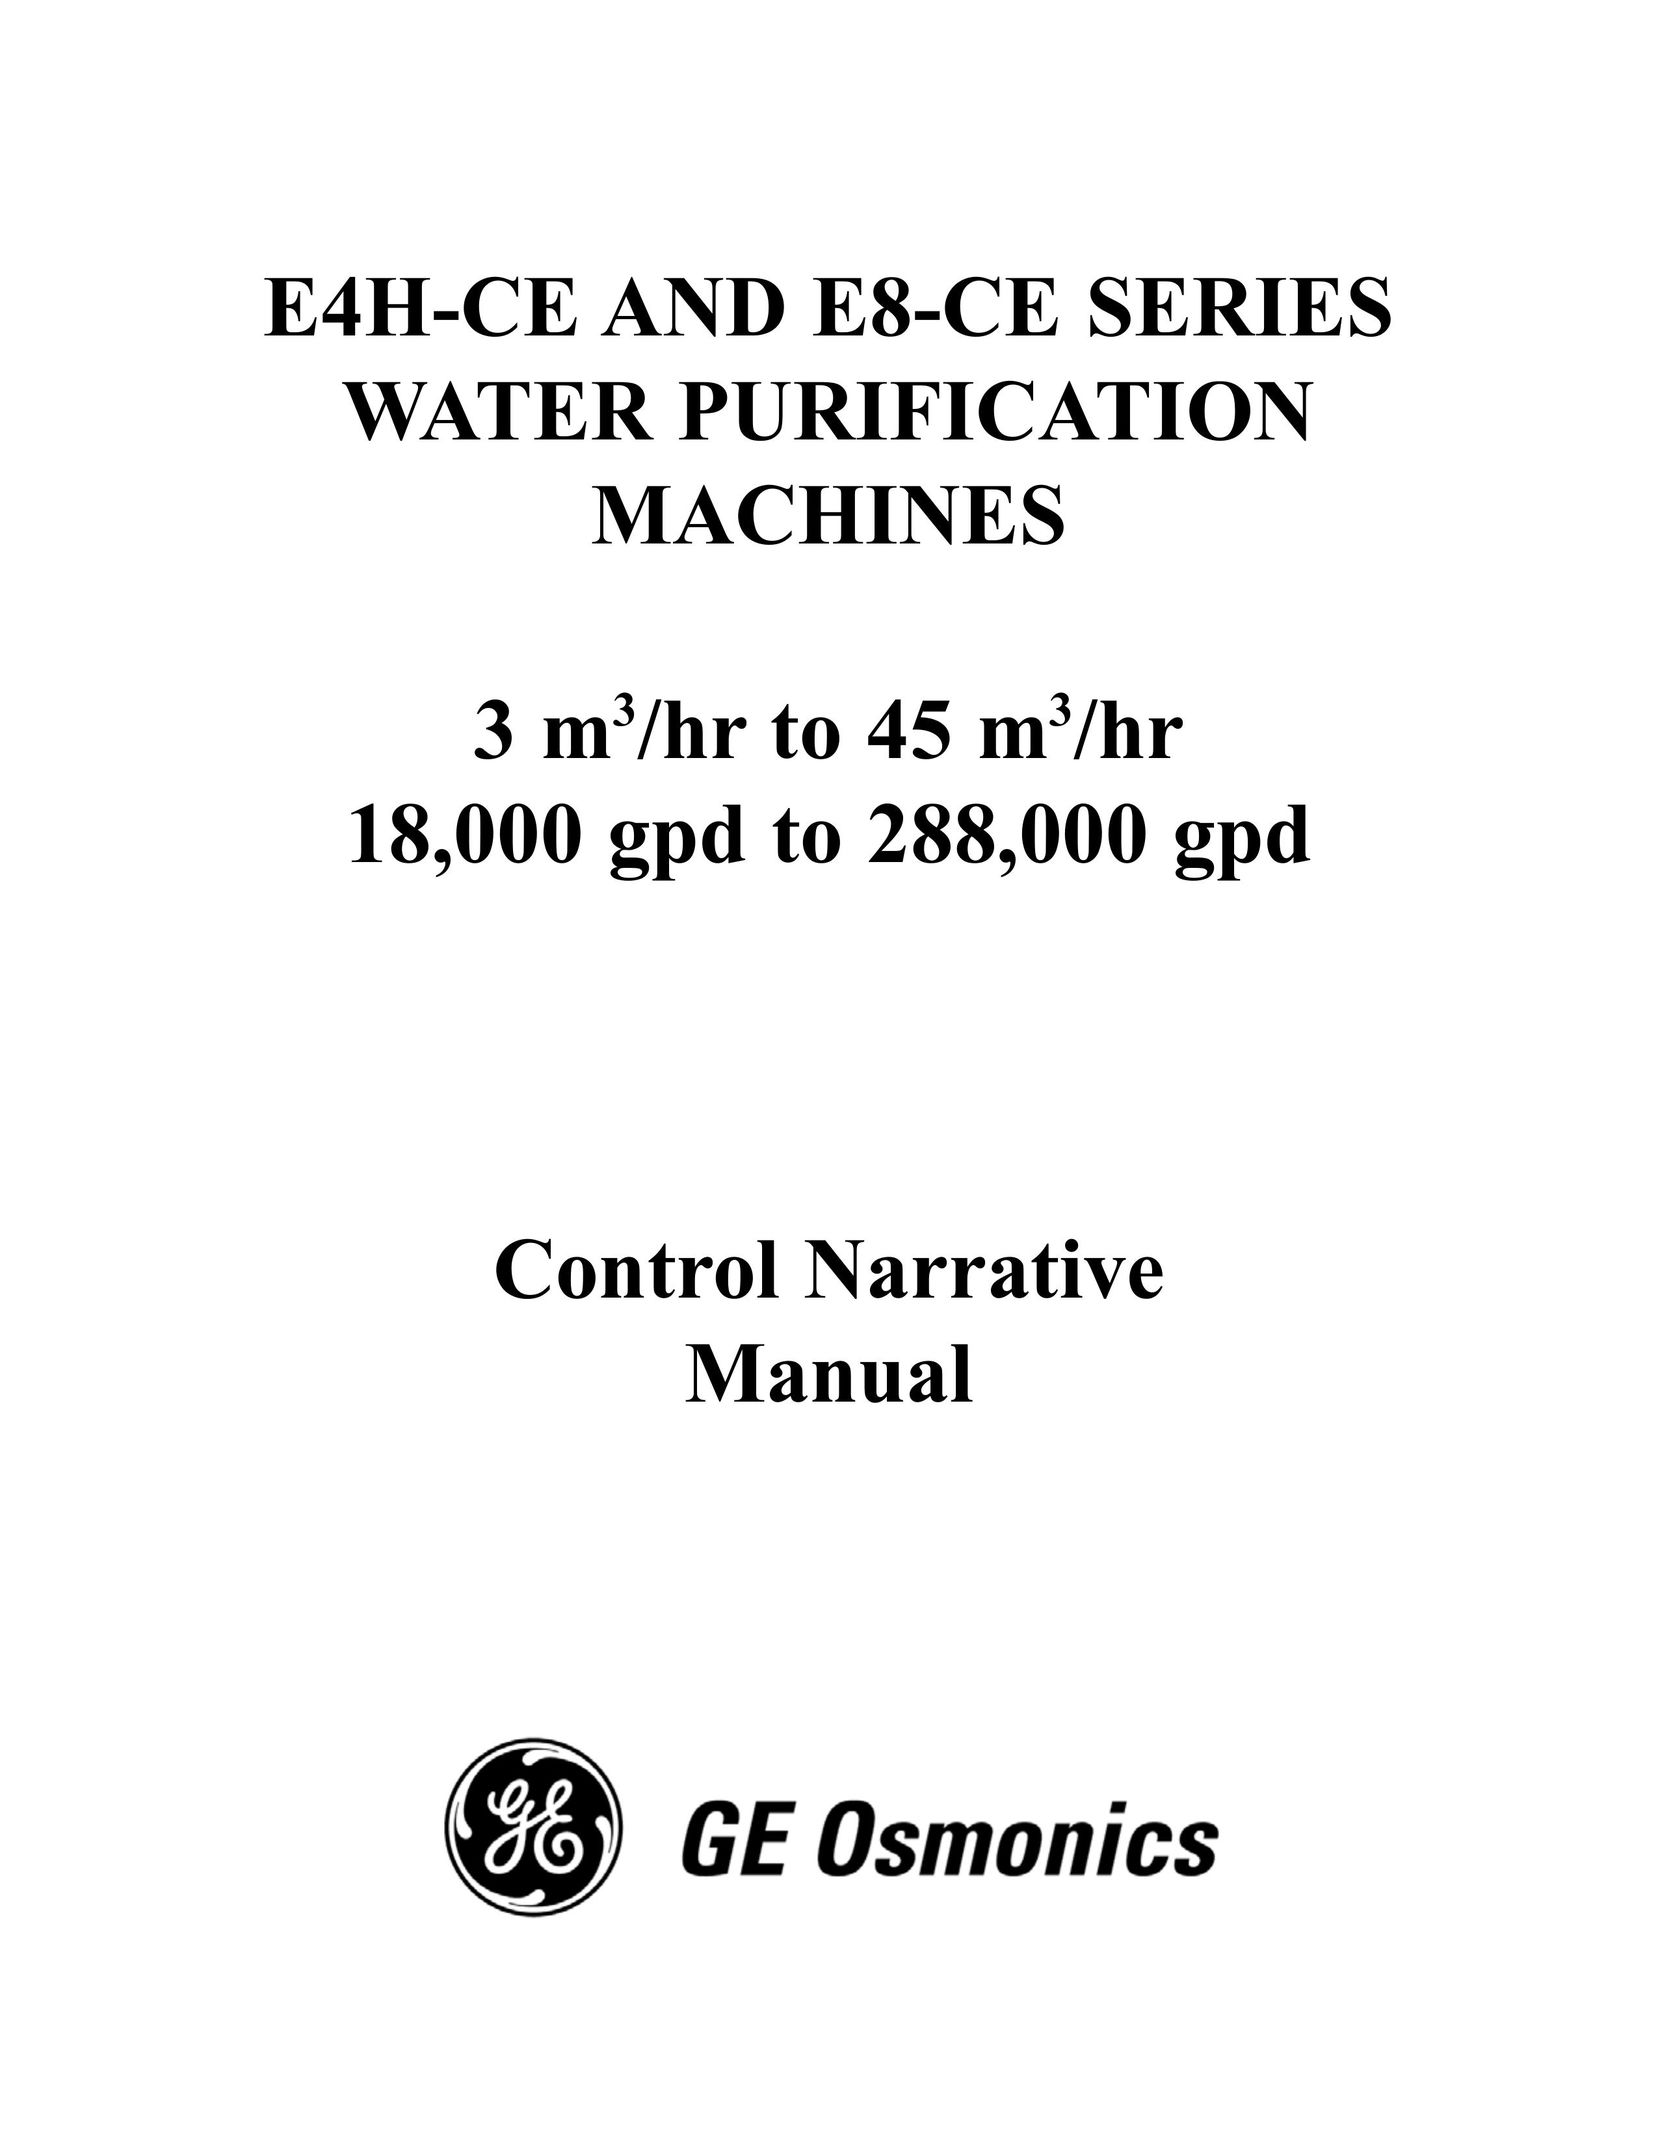 GE E4H-CE Water System User Manual